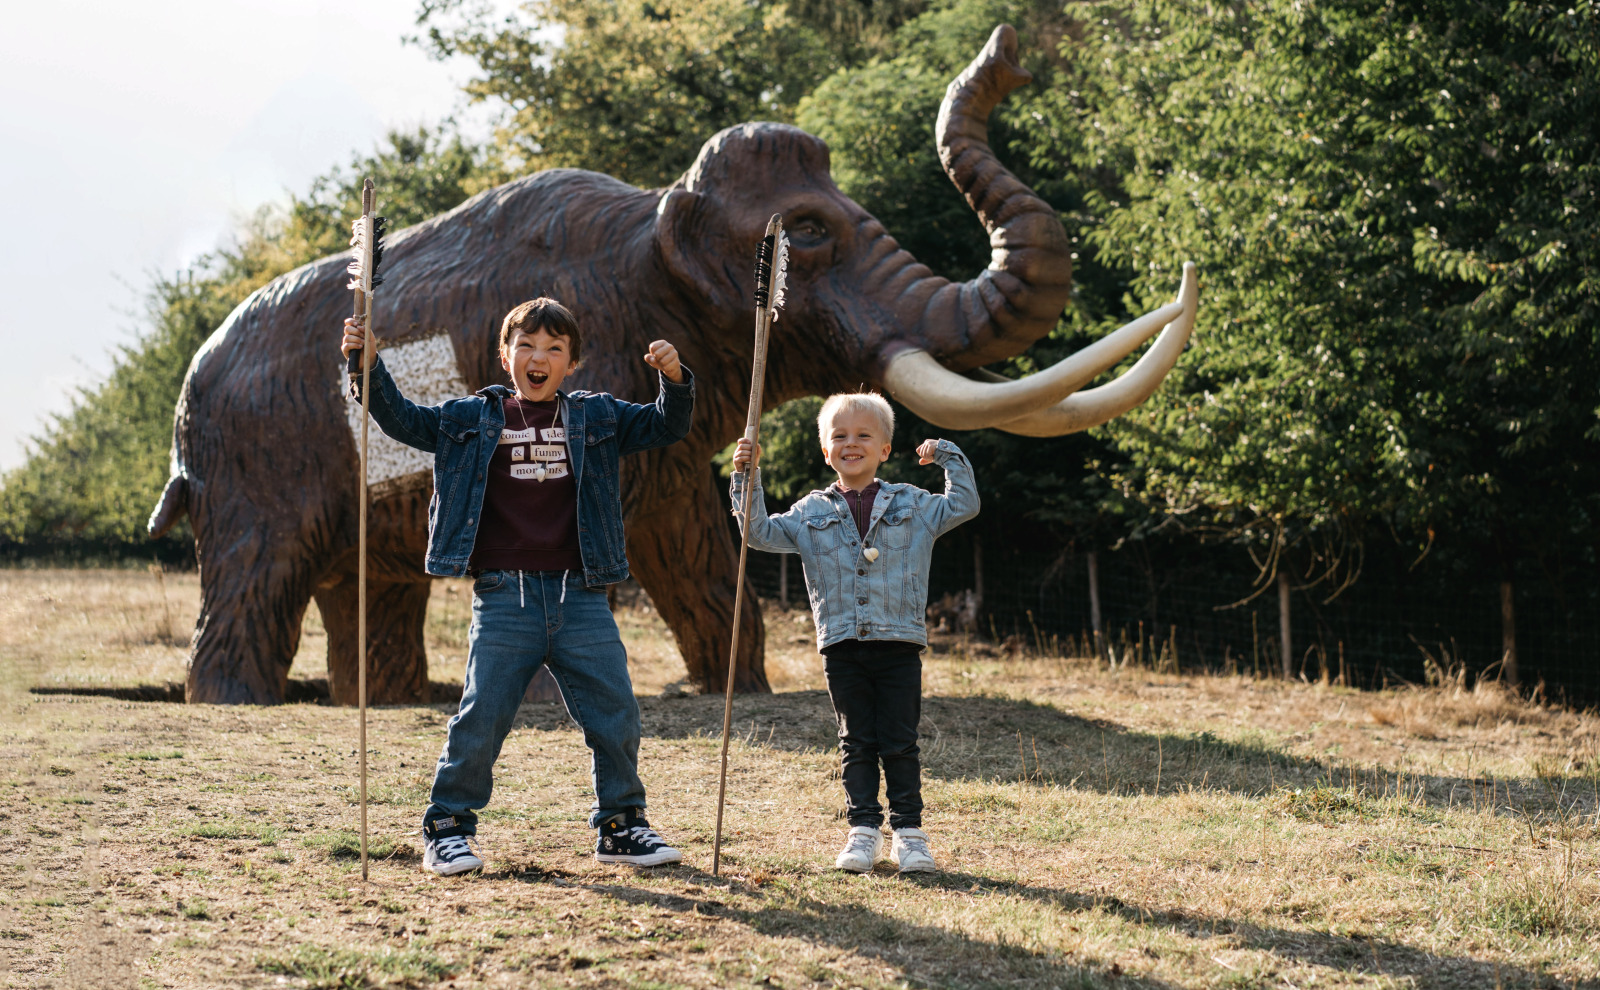 2 children with spears and a mammoth in the background at the Préhistomuseum in Flémalle